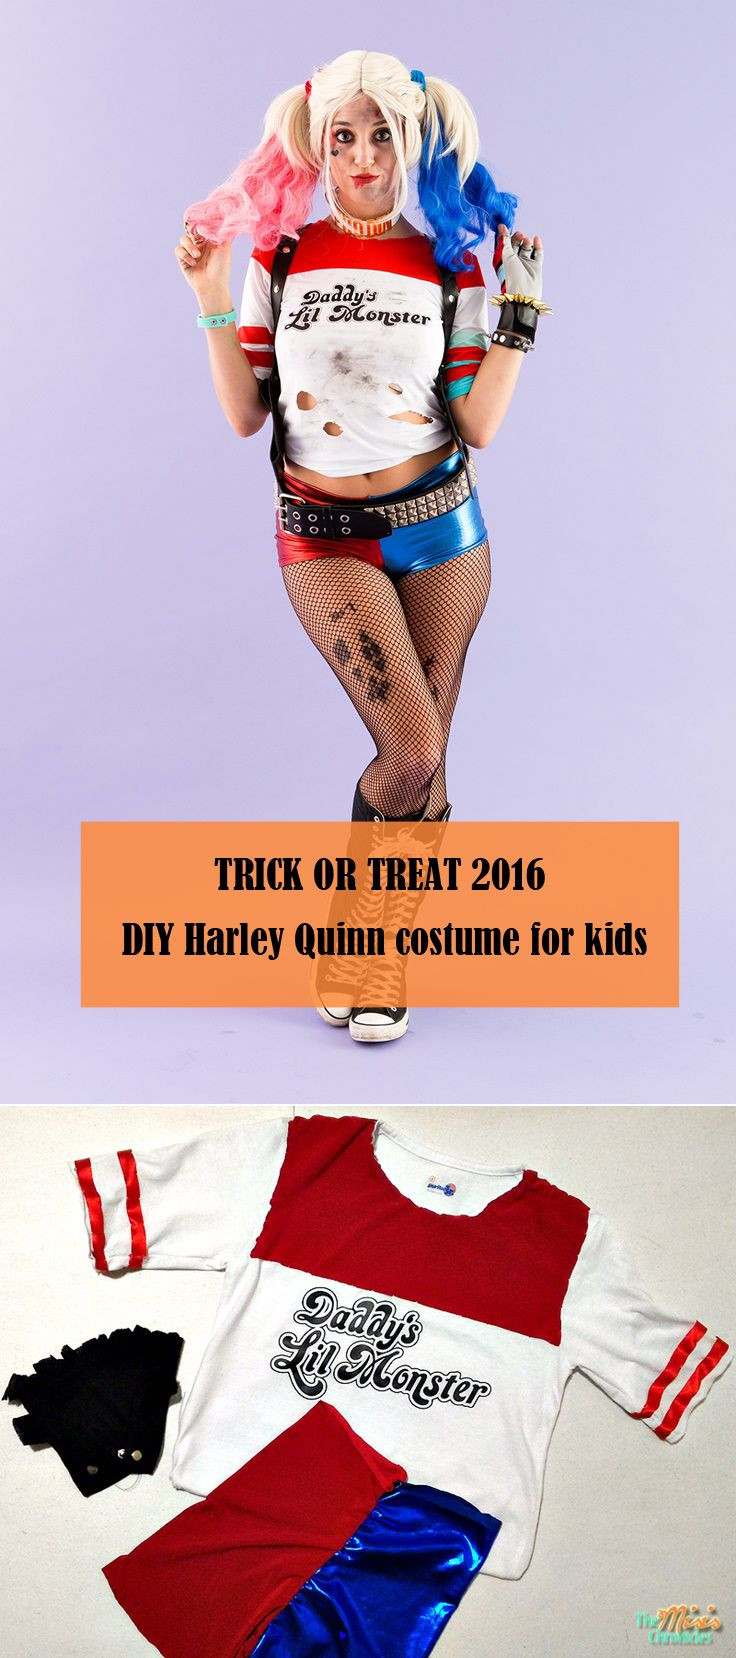 Harley Quinn Kids Costume DIY
 Here s how to DIY a Harley Quinn costume for your kids